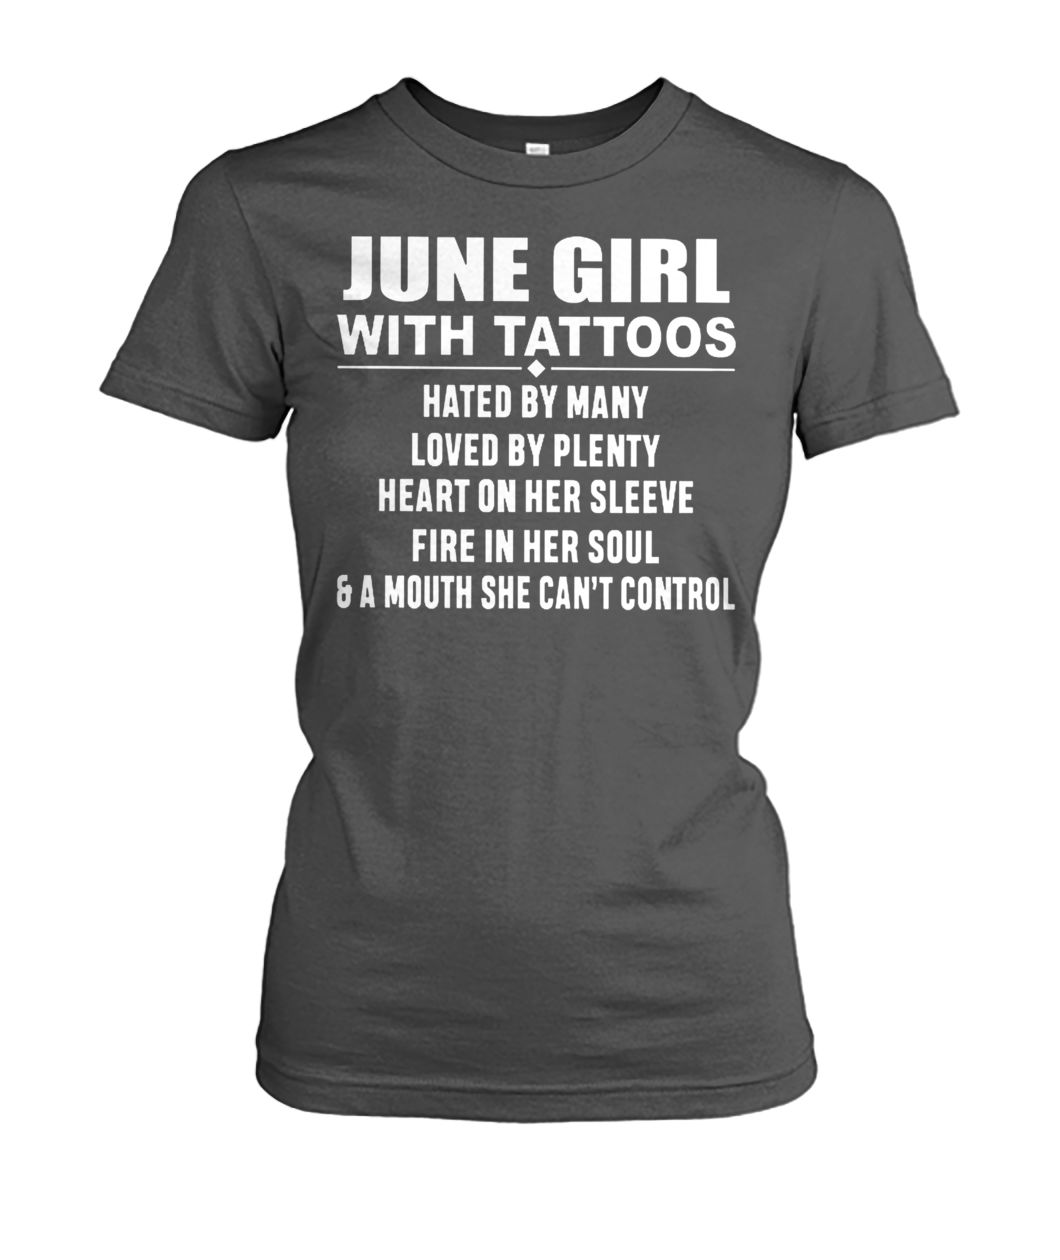 June girl with tattoos hated by many loved by plenty heart on her sleeve women's crew tee